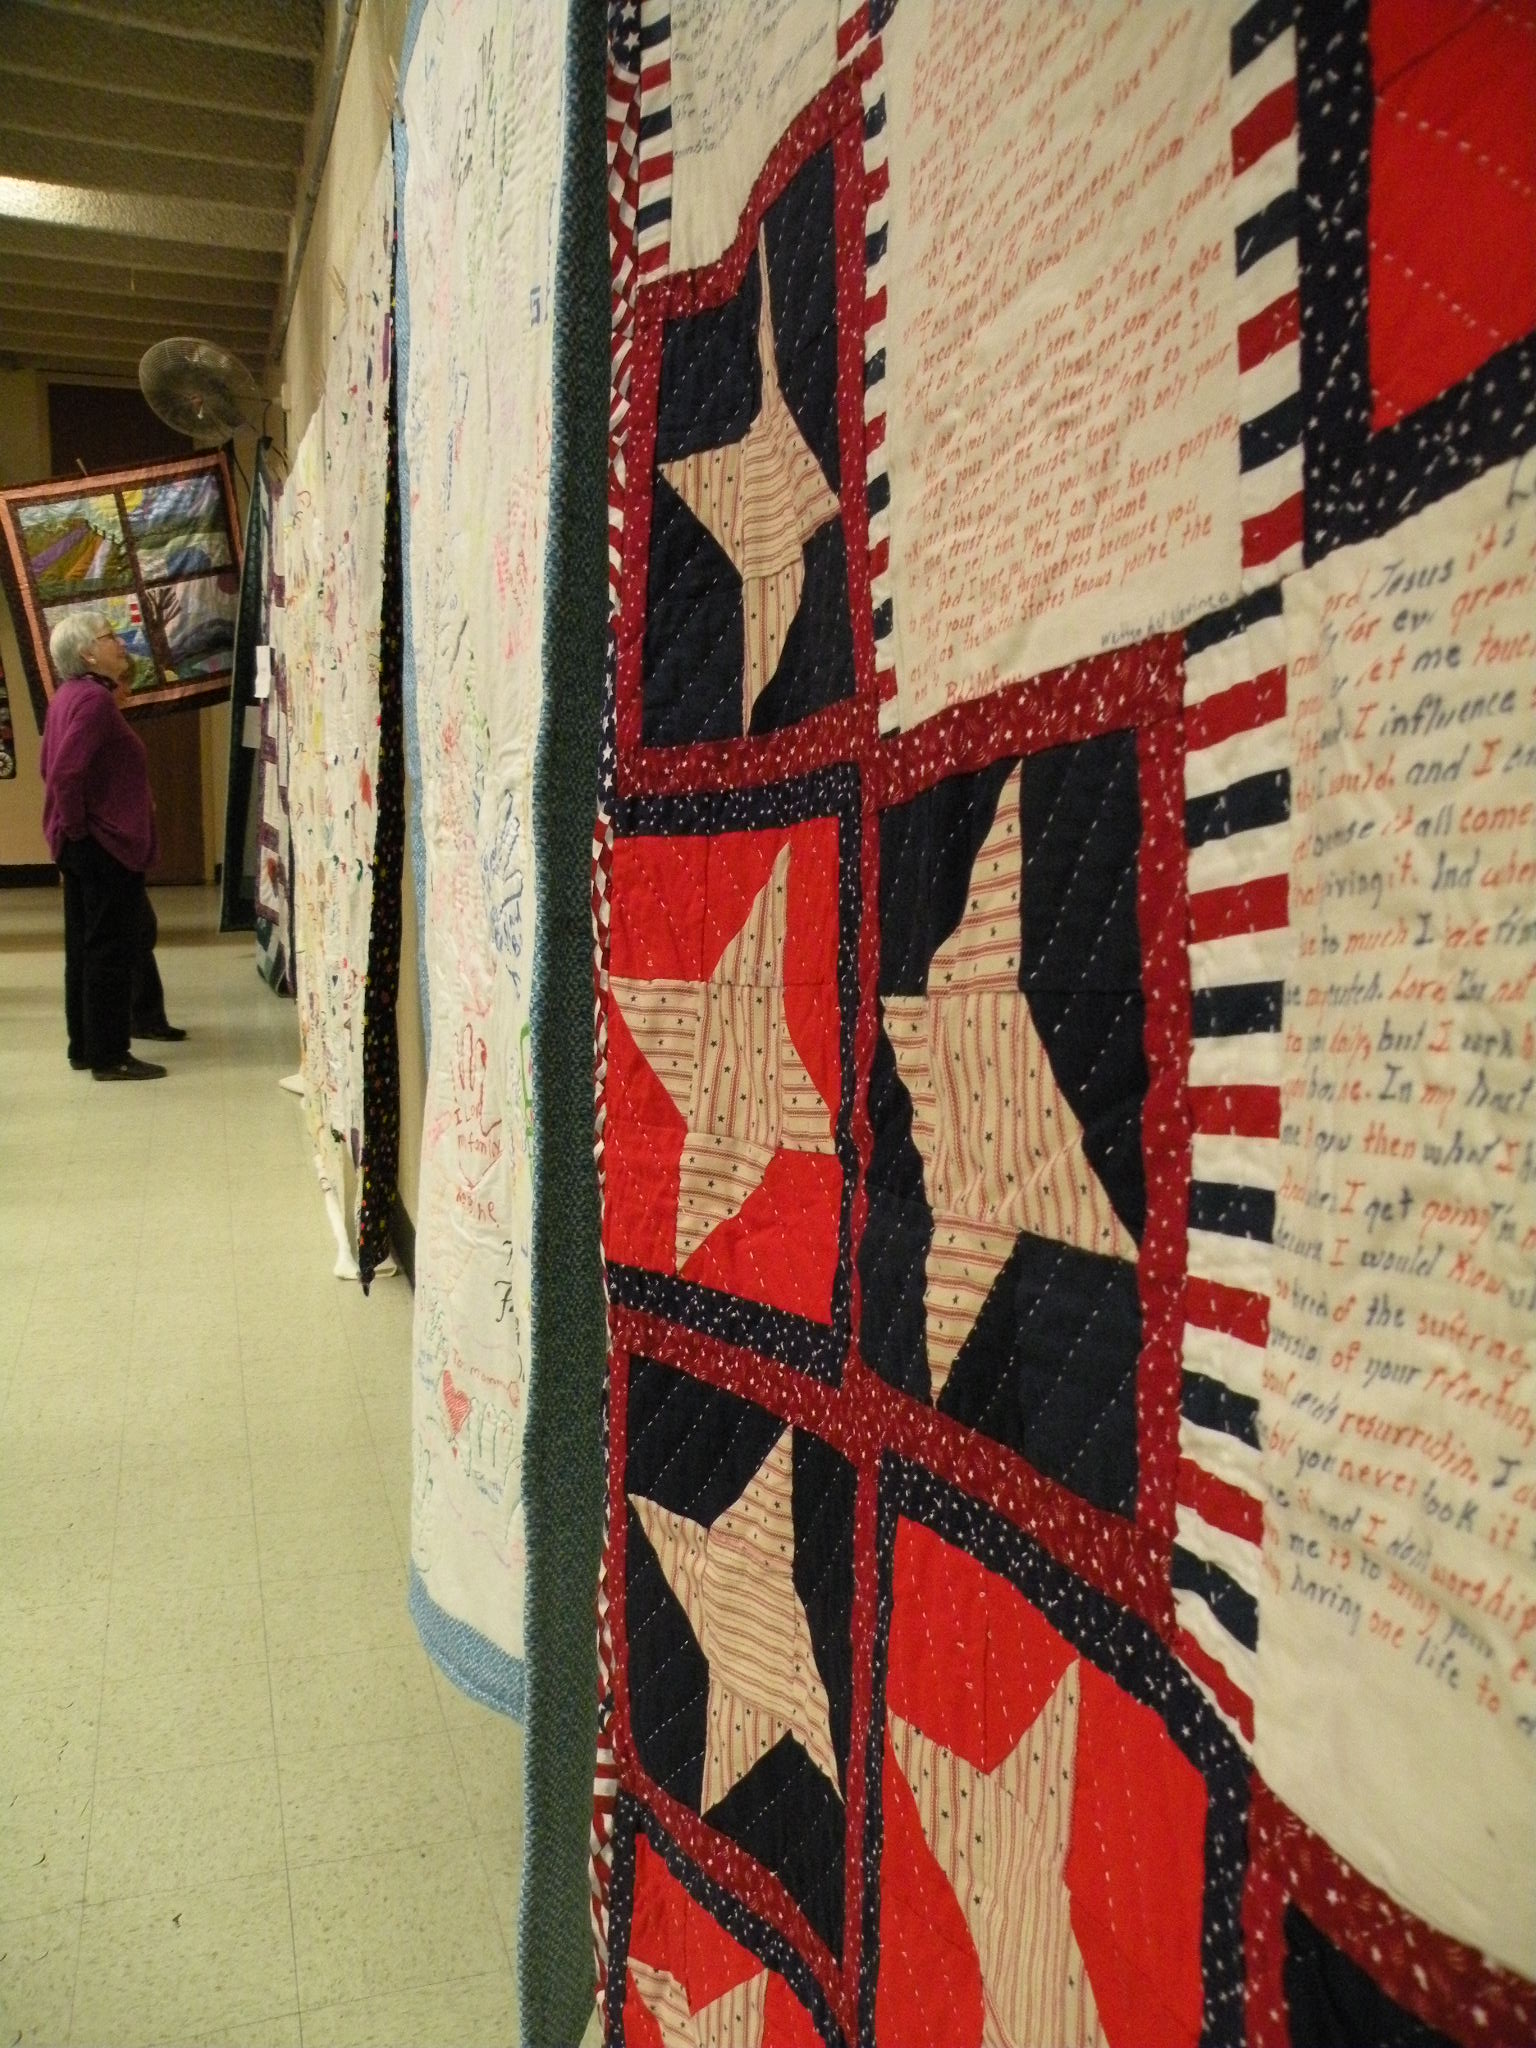 Patuxent Institution Women Inmates to Donate 150 Quilts